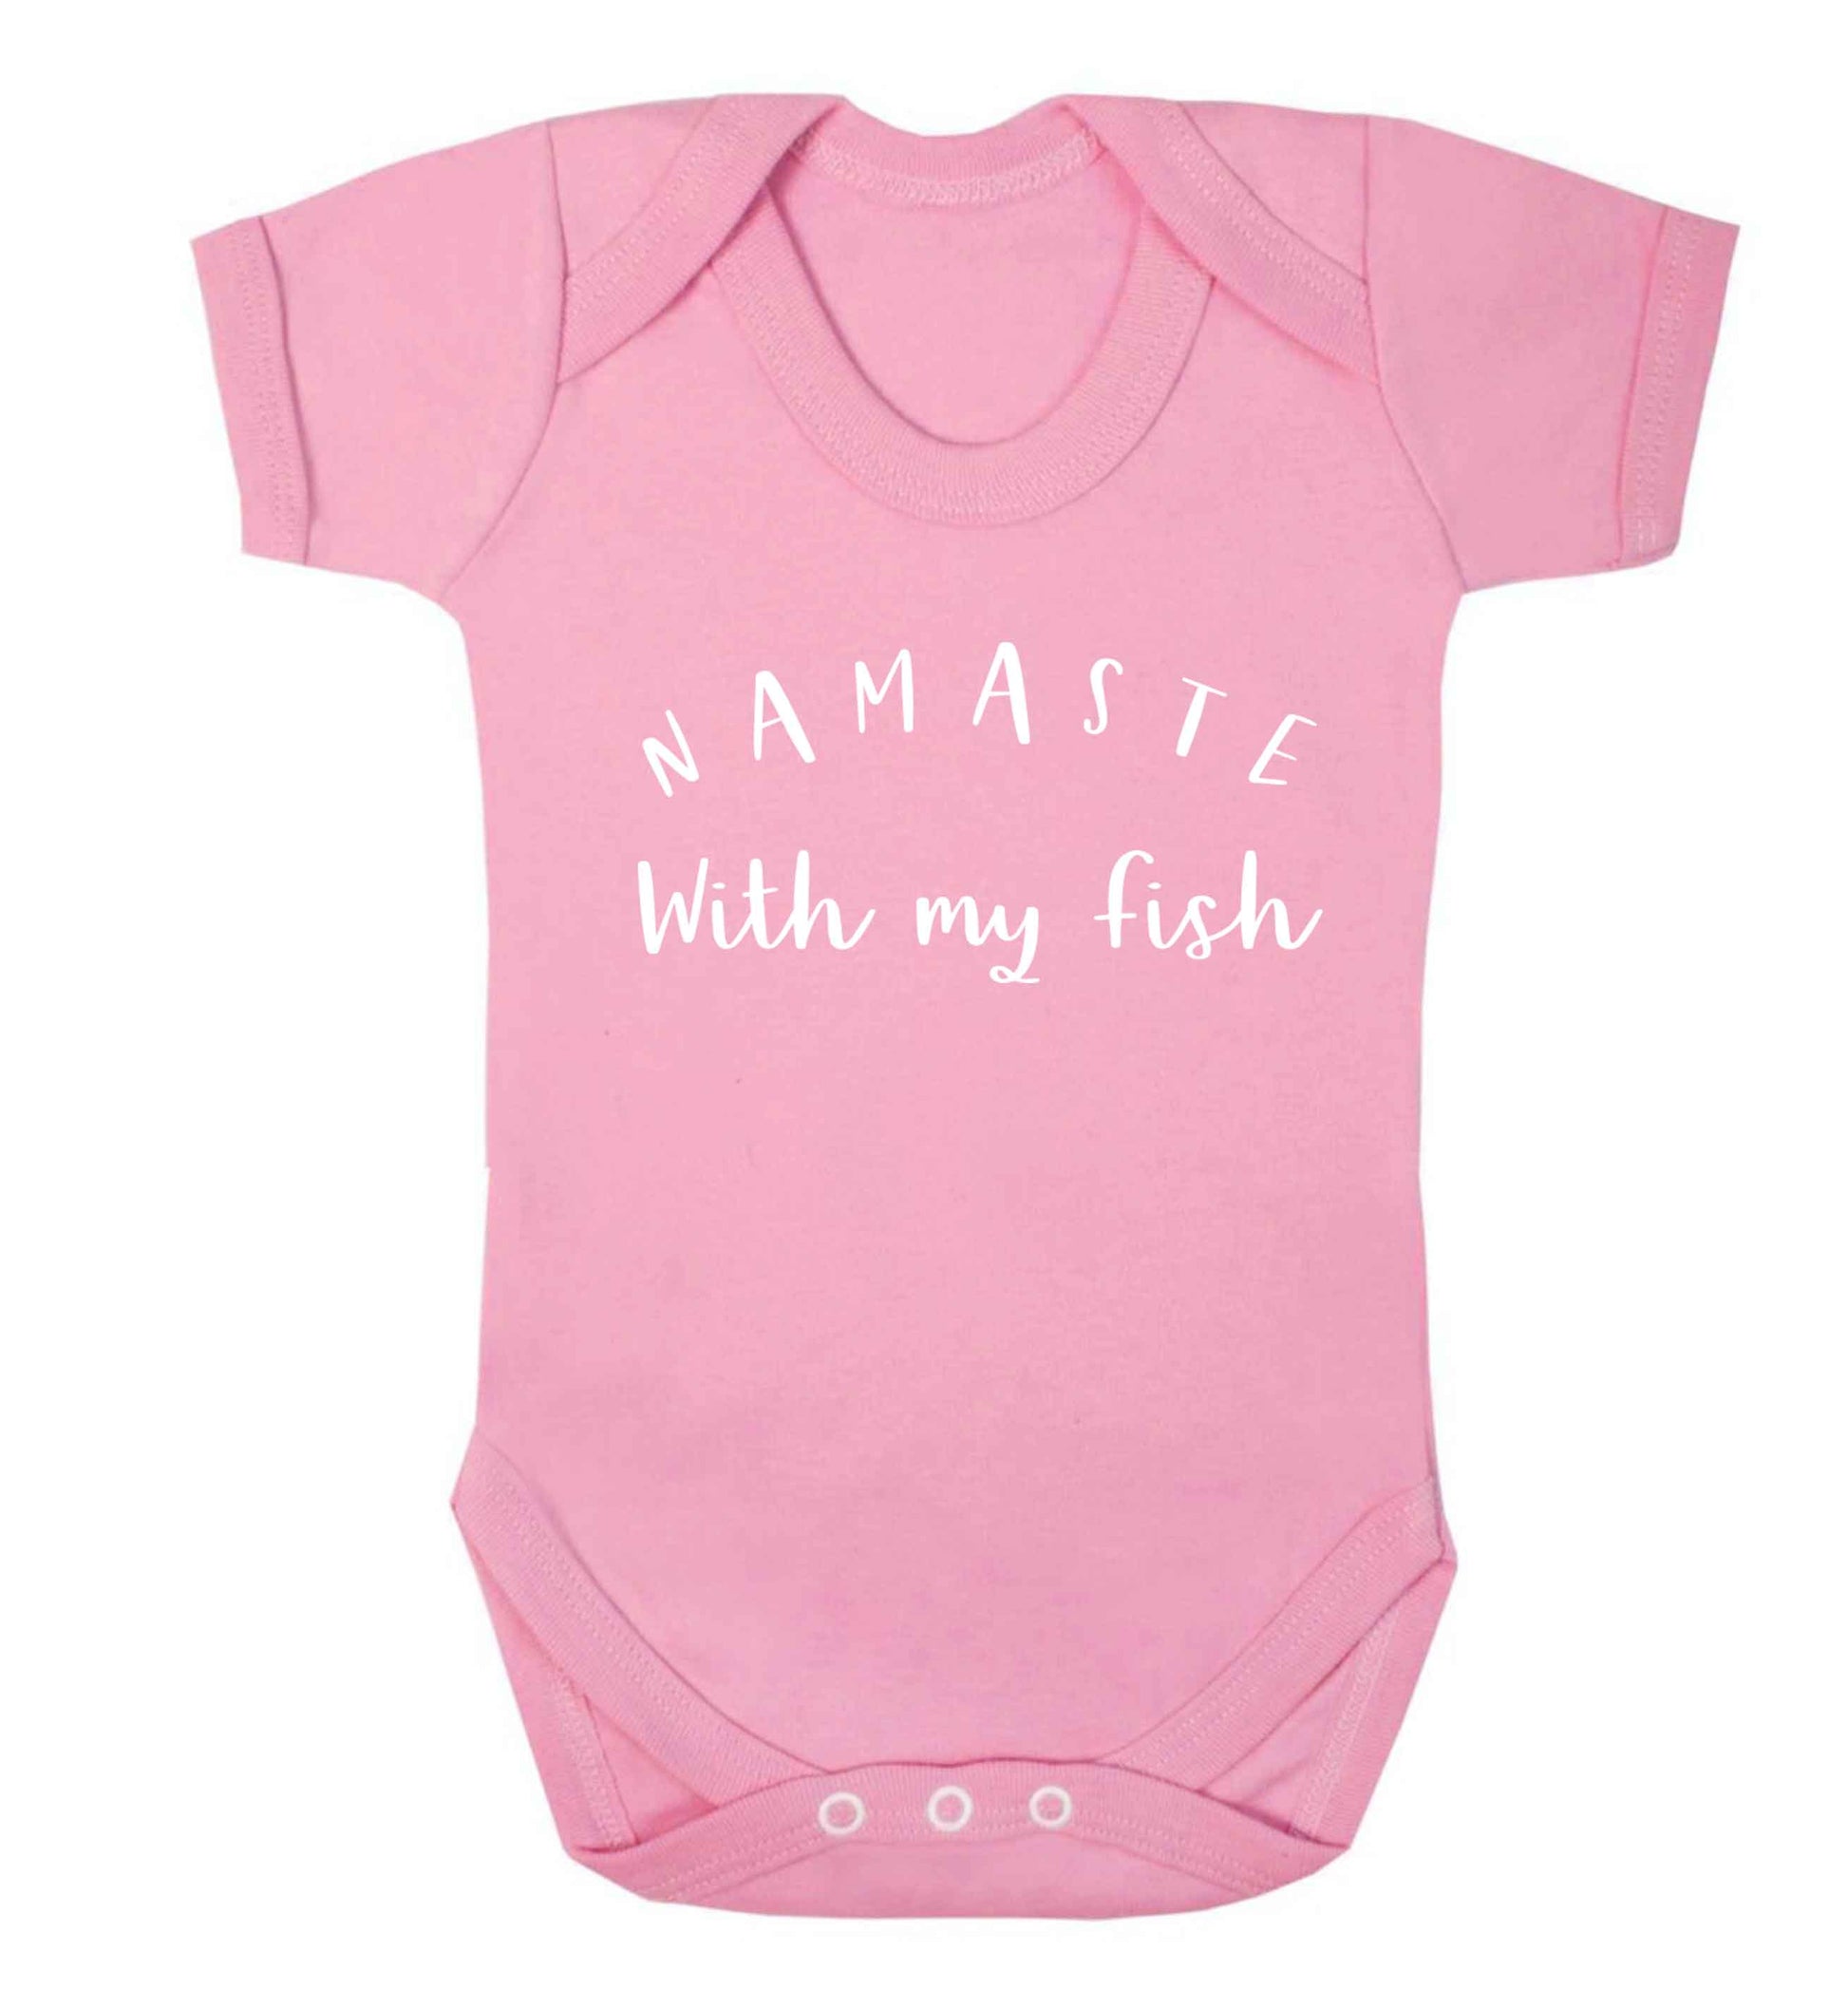 Namaste with my fish Baby Vest pale pink 18-24 months